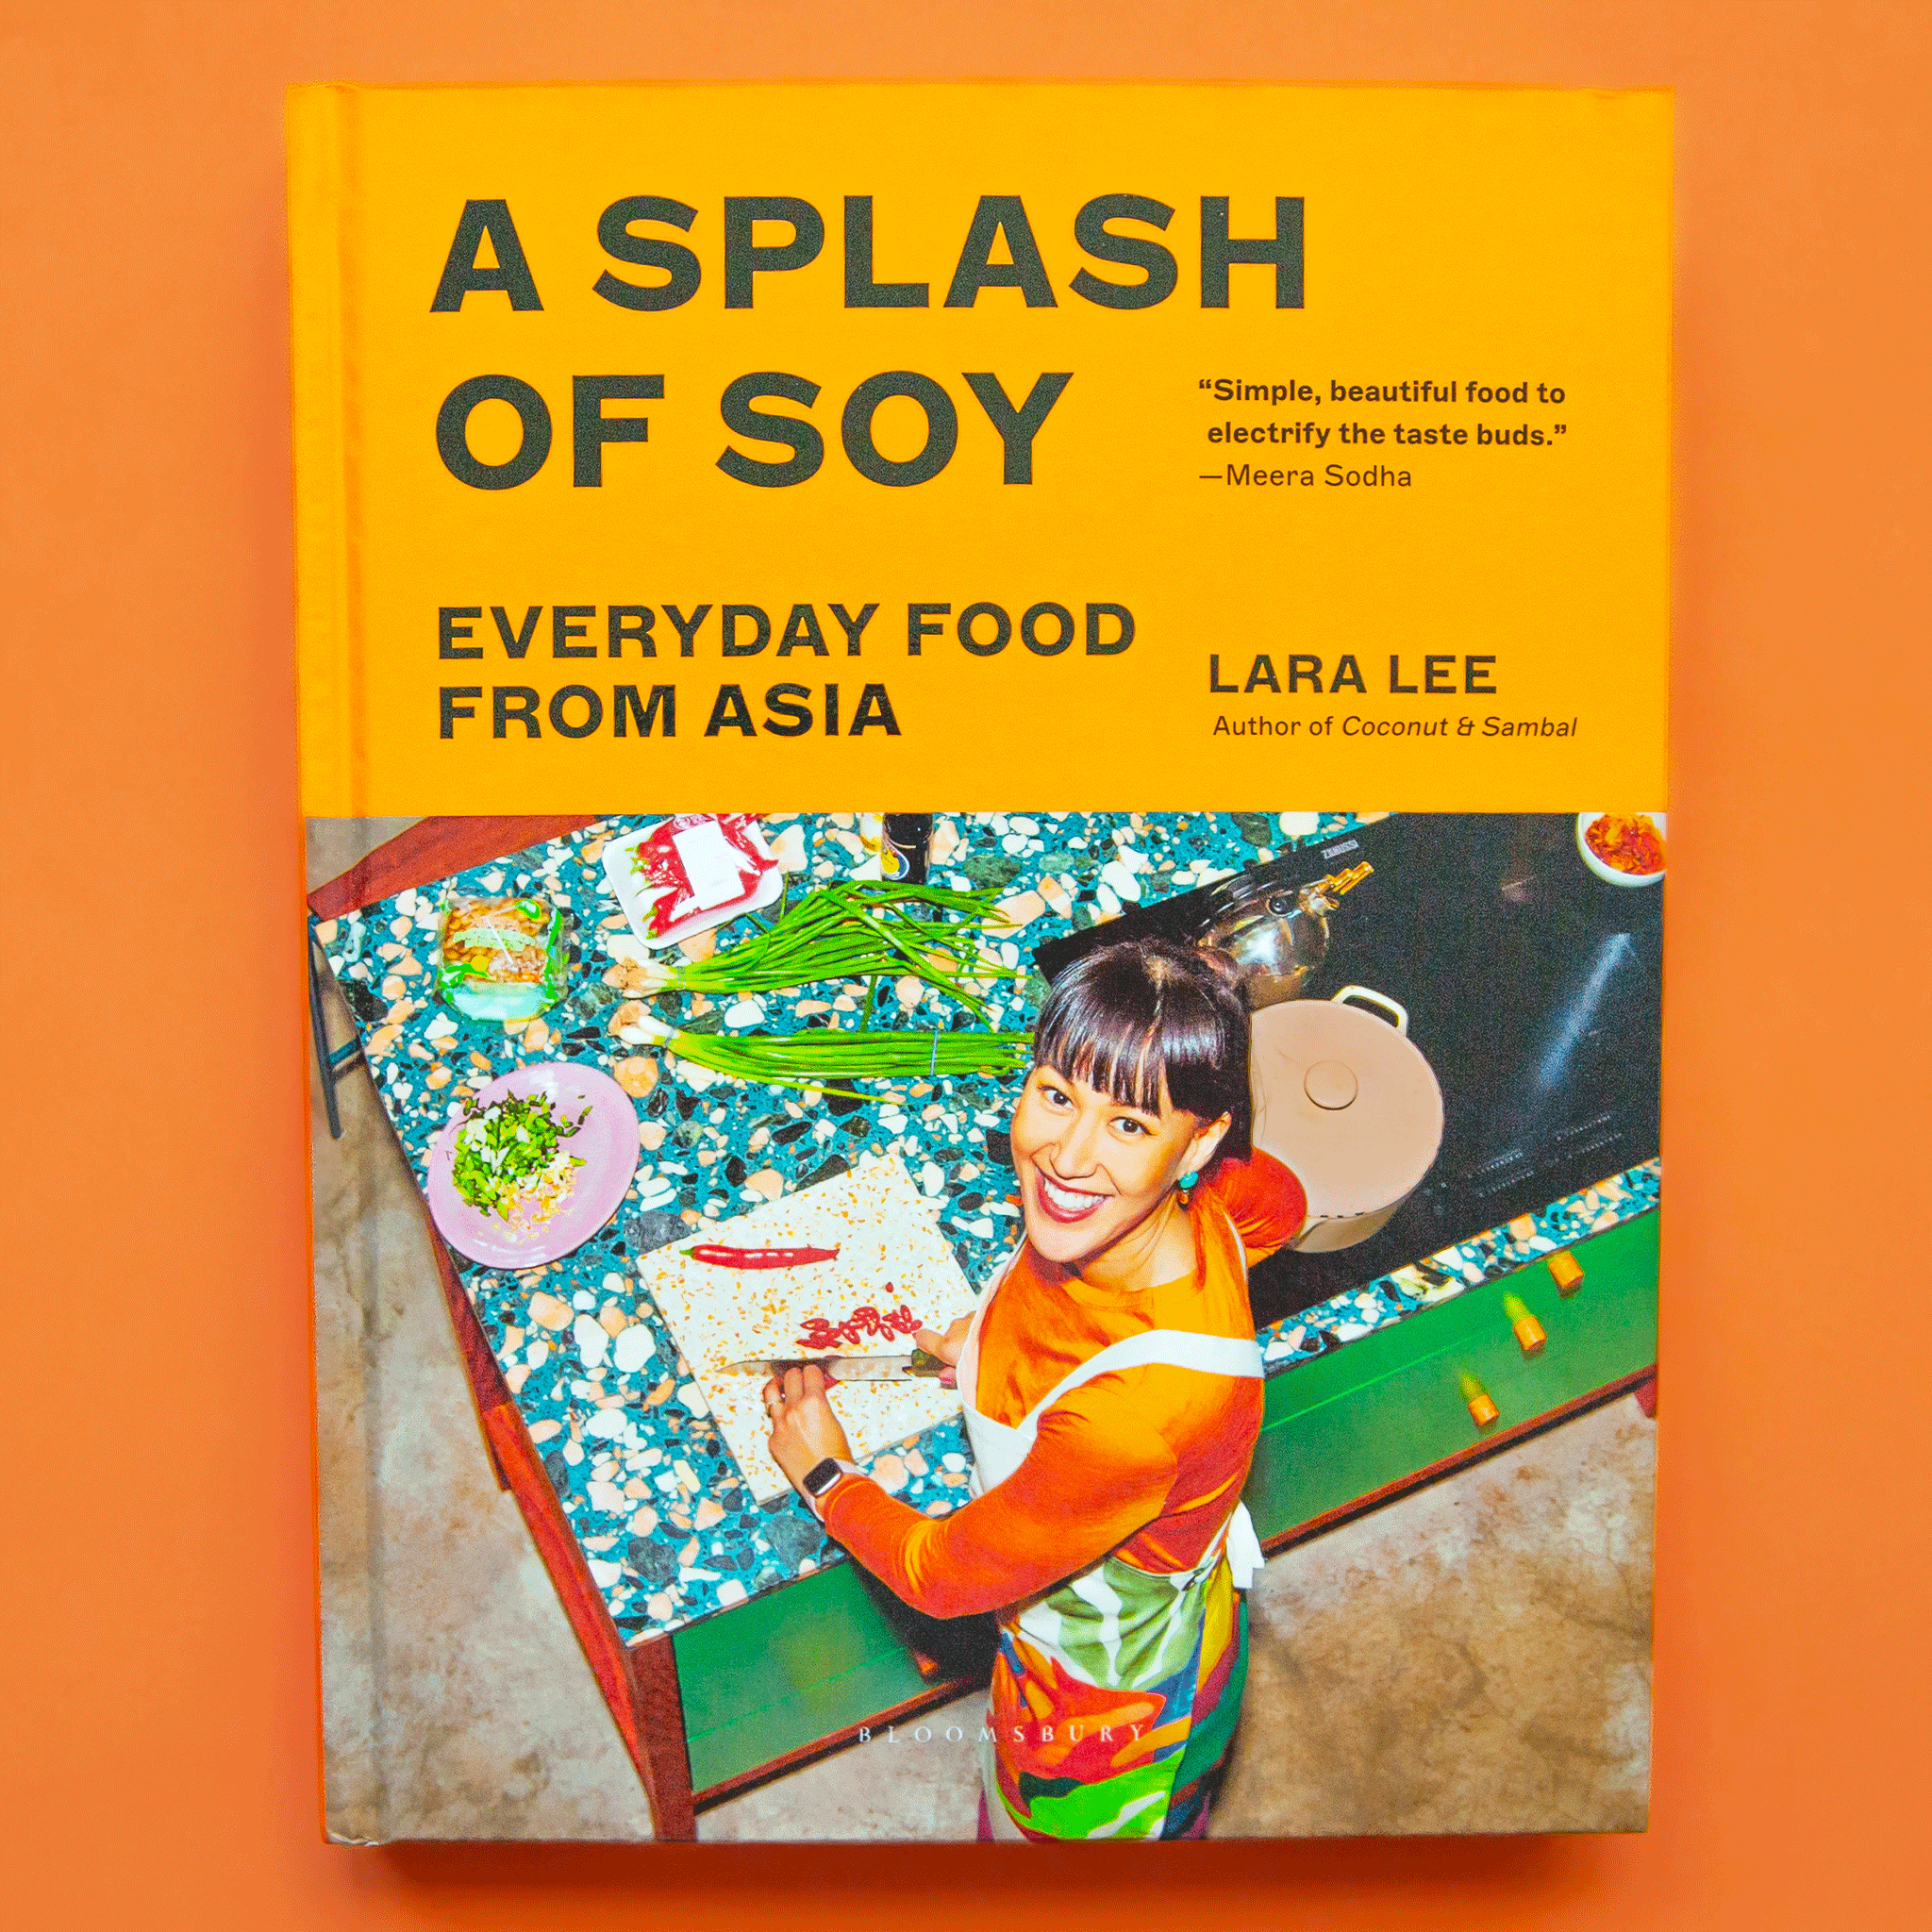 On an orange background is a yellow book with a photo of a woman cooking and the title that reads, "A Splash Of Soy Everyday Food From Asia". 